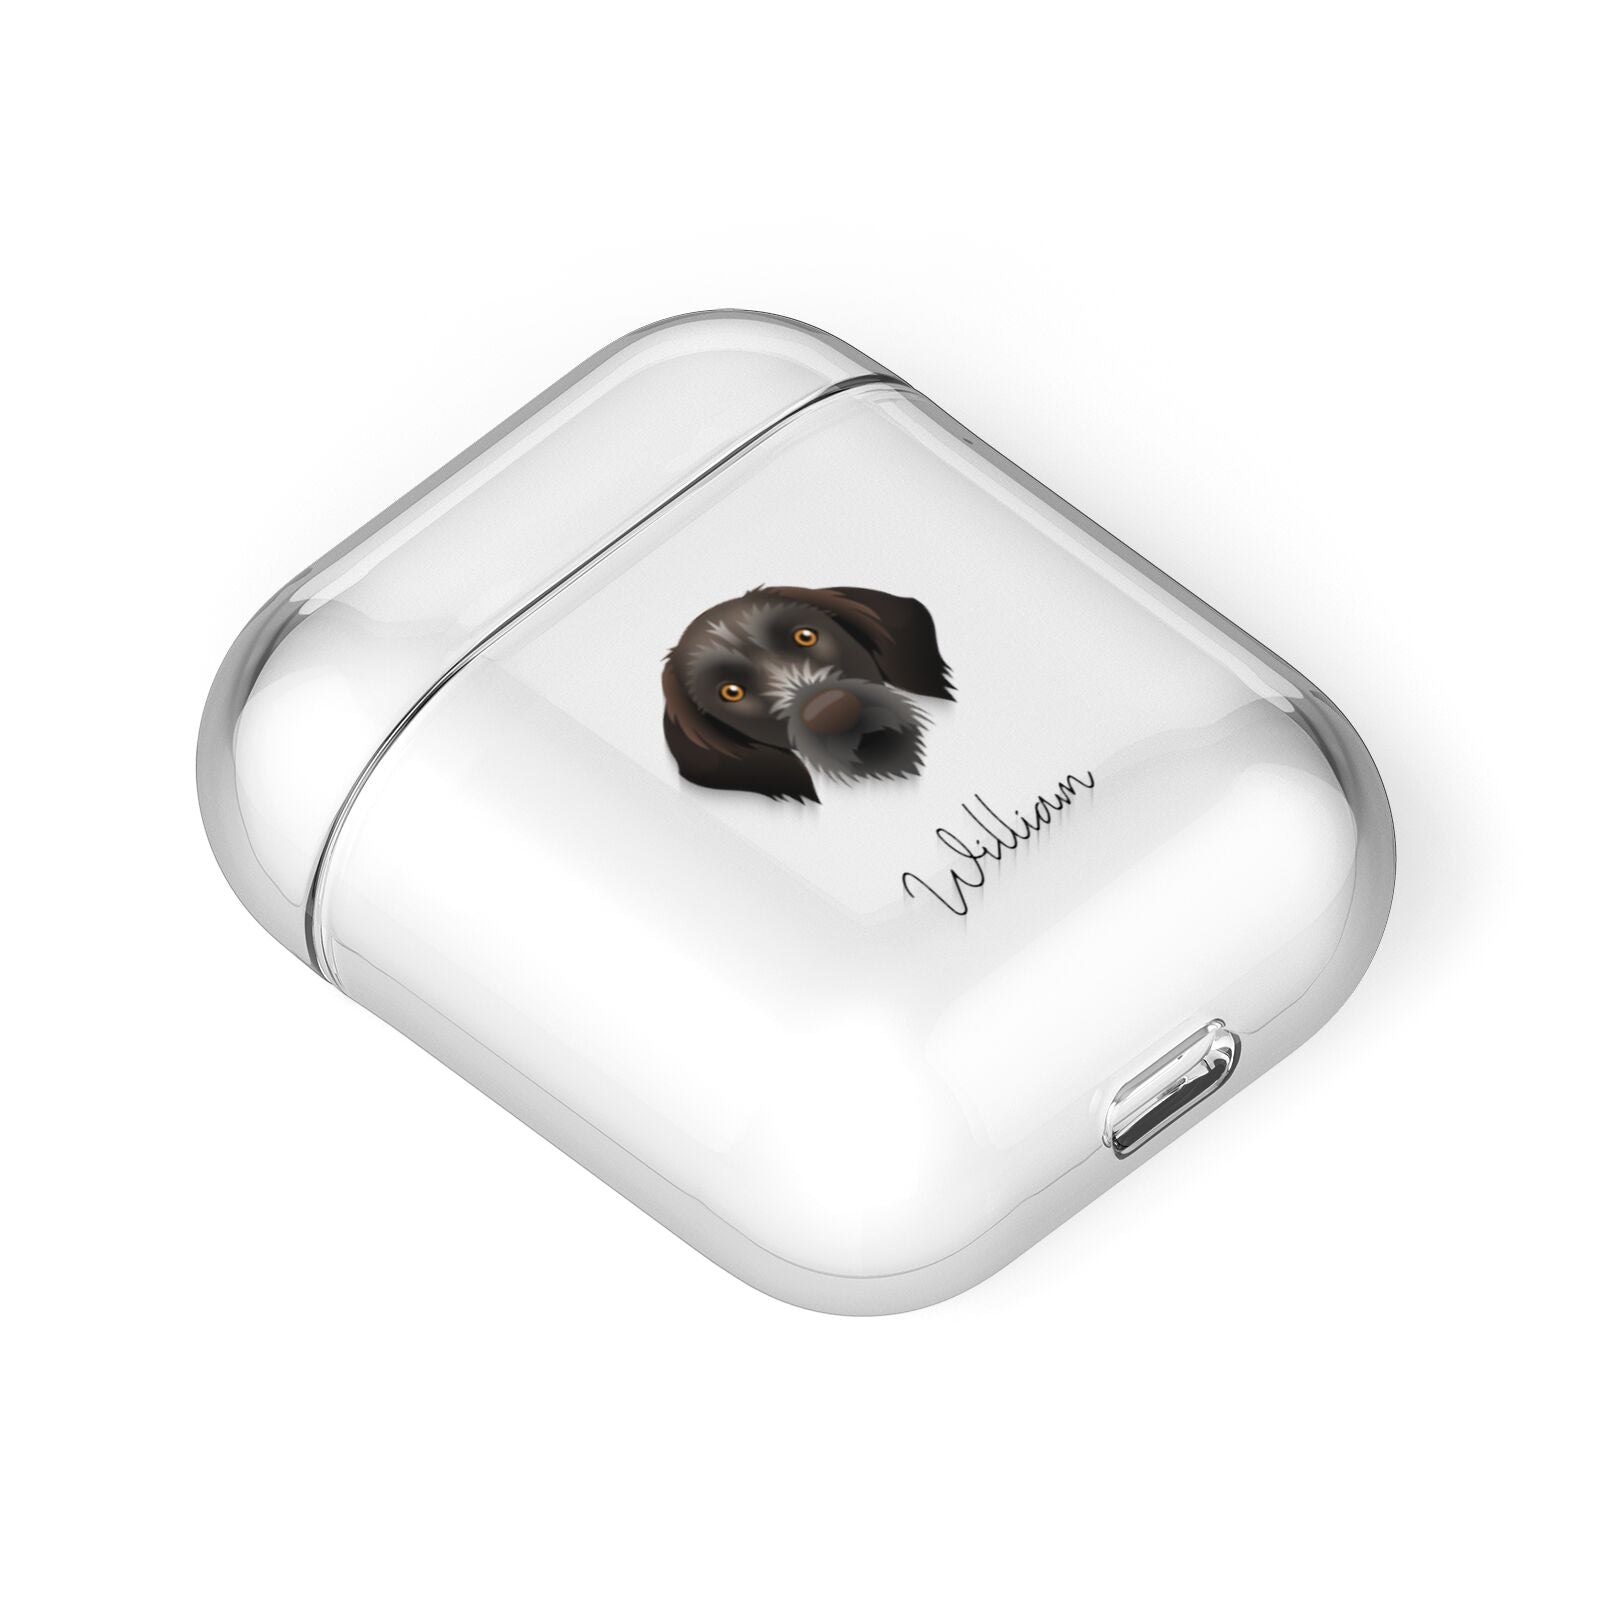 Korthals Griffon Personalised AirPods Case Laid Flat